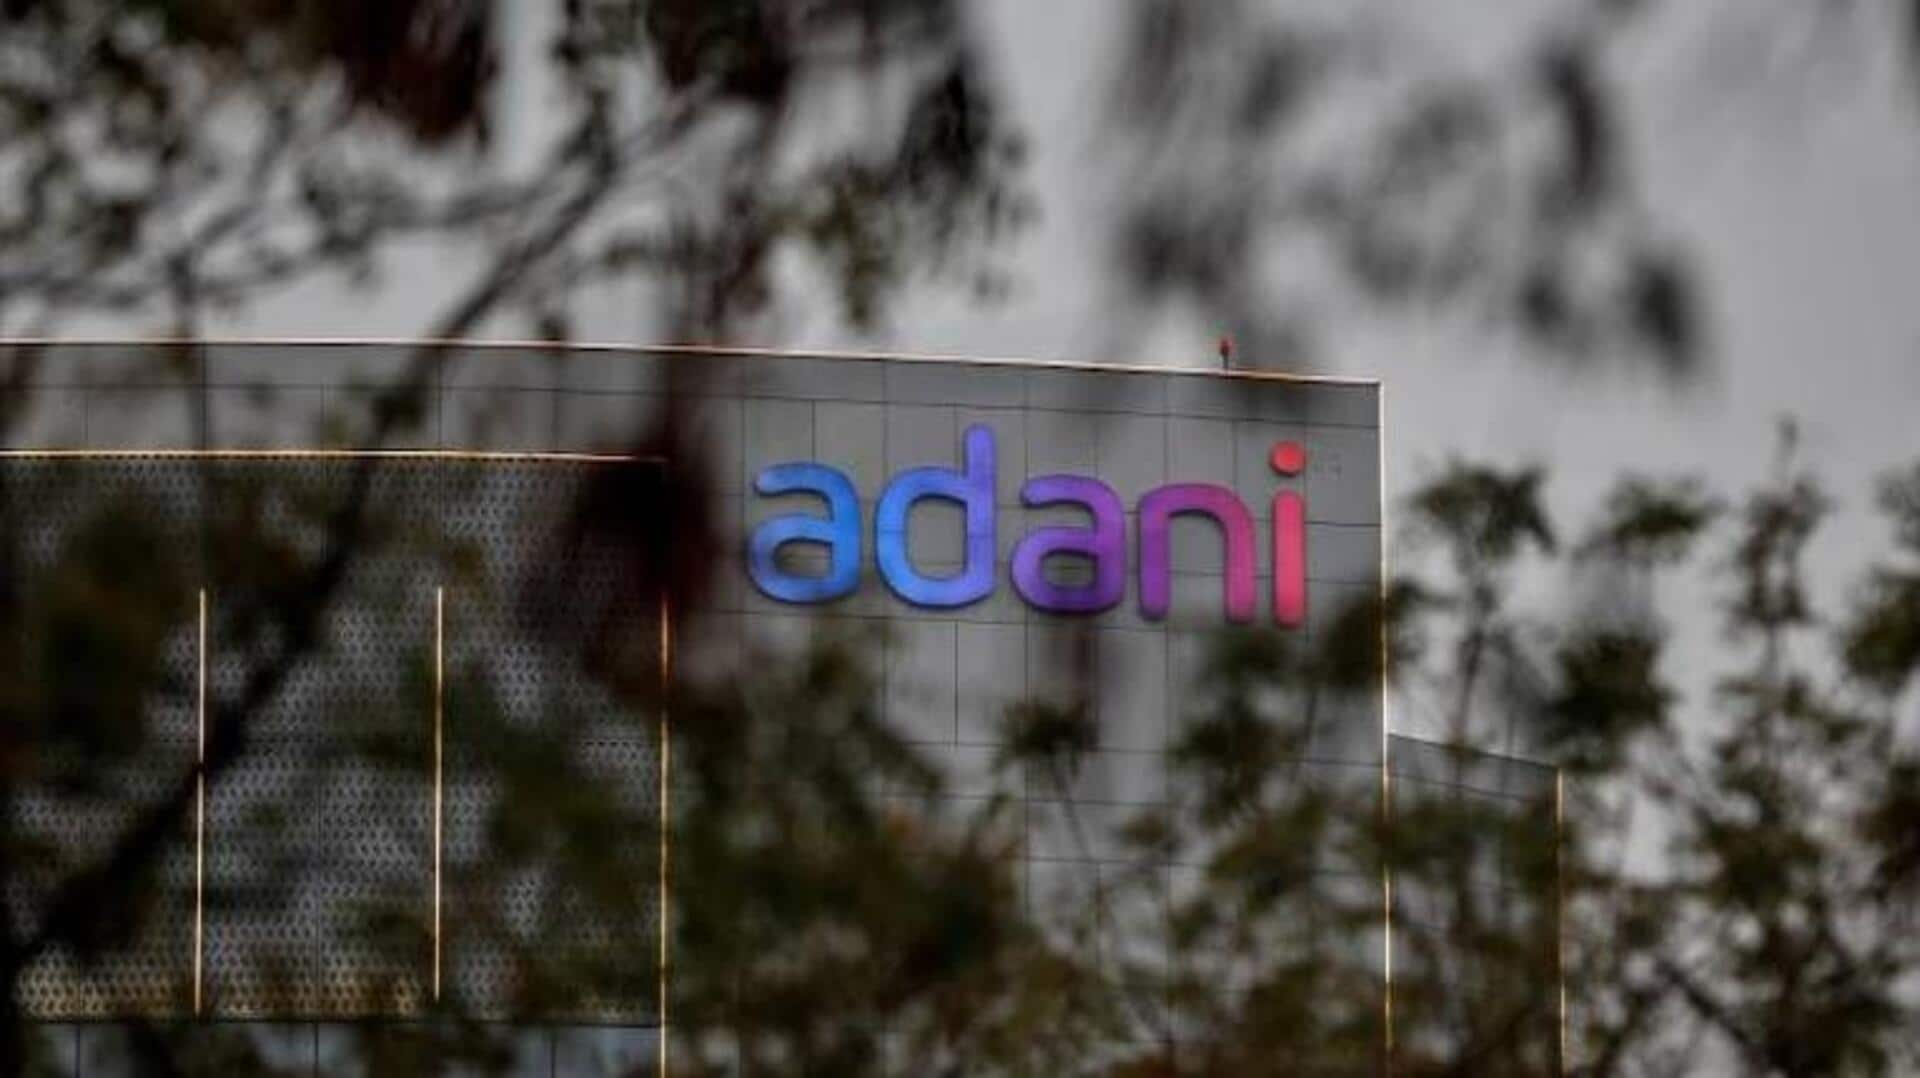 Adani Group plans to list airport business in near future